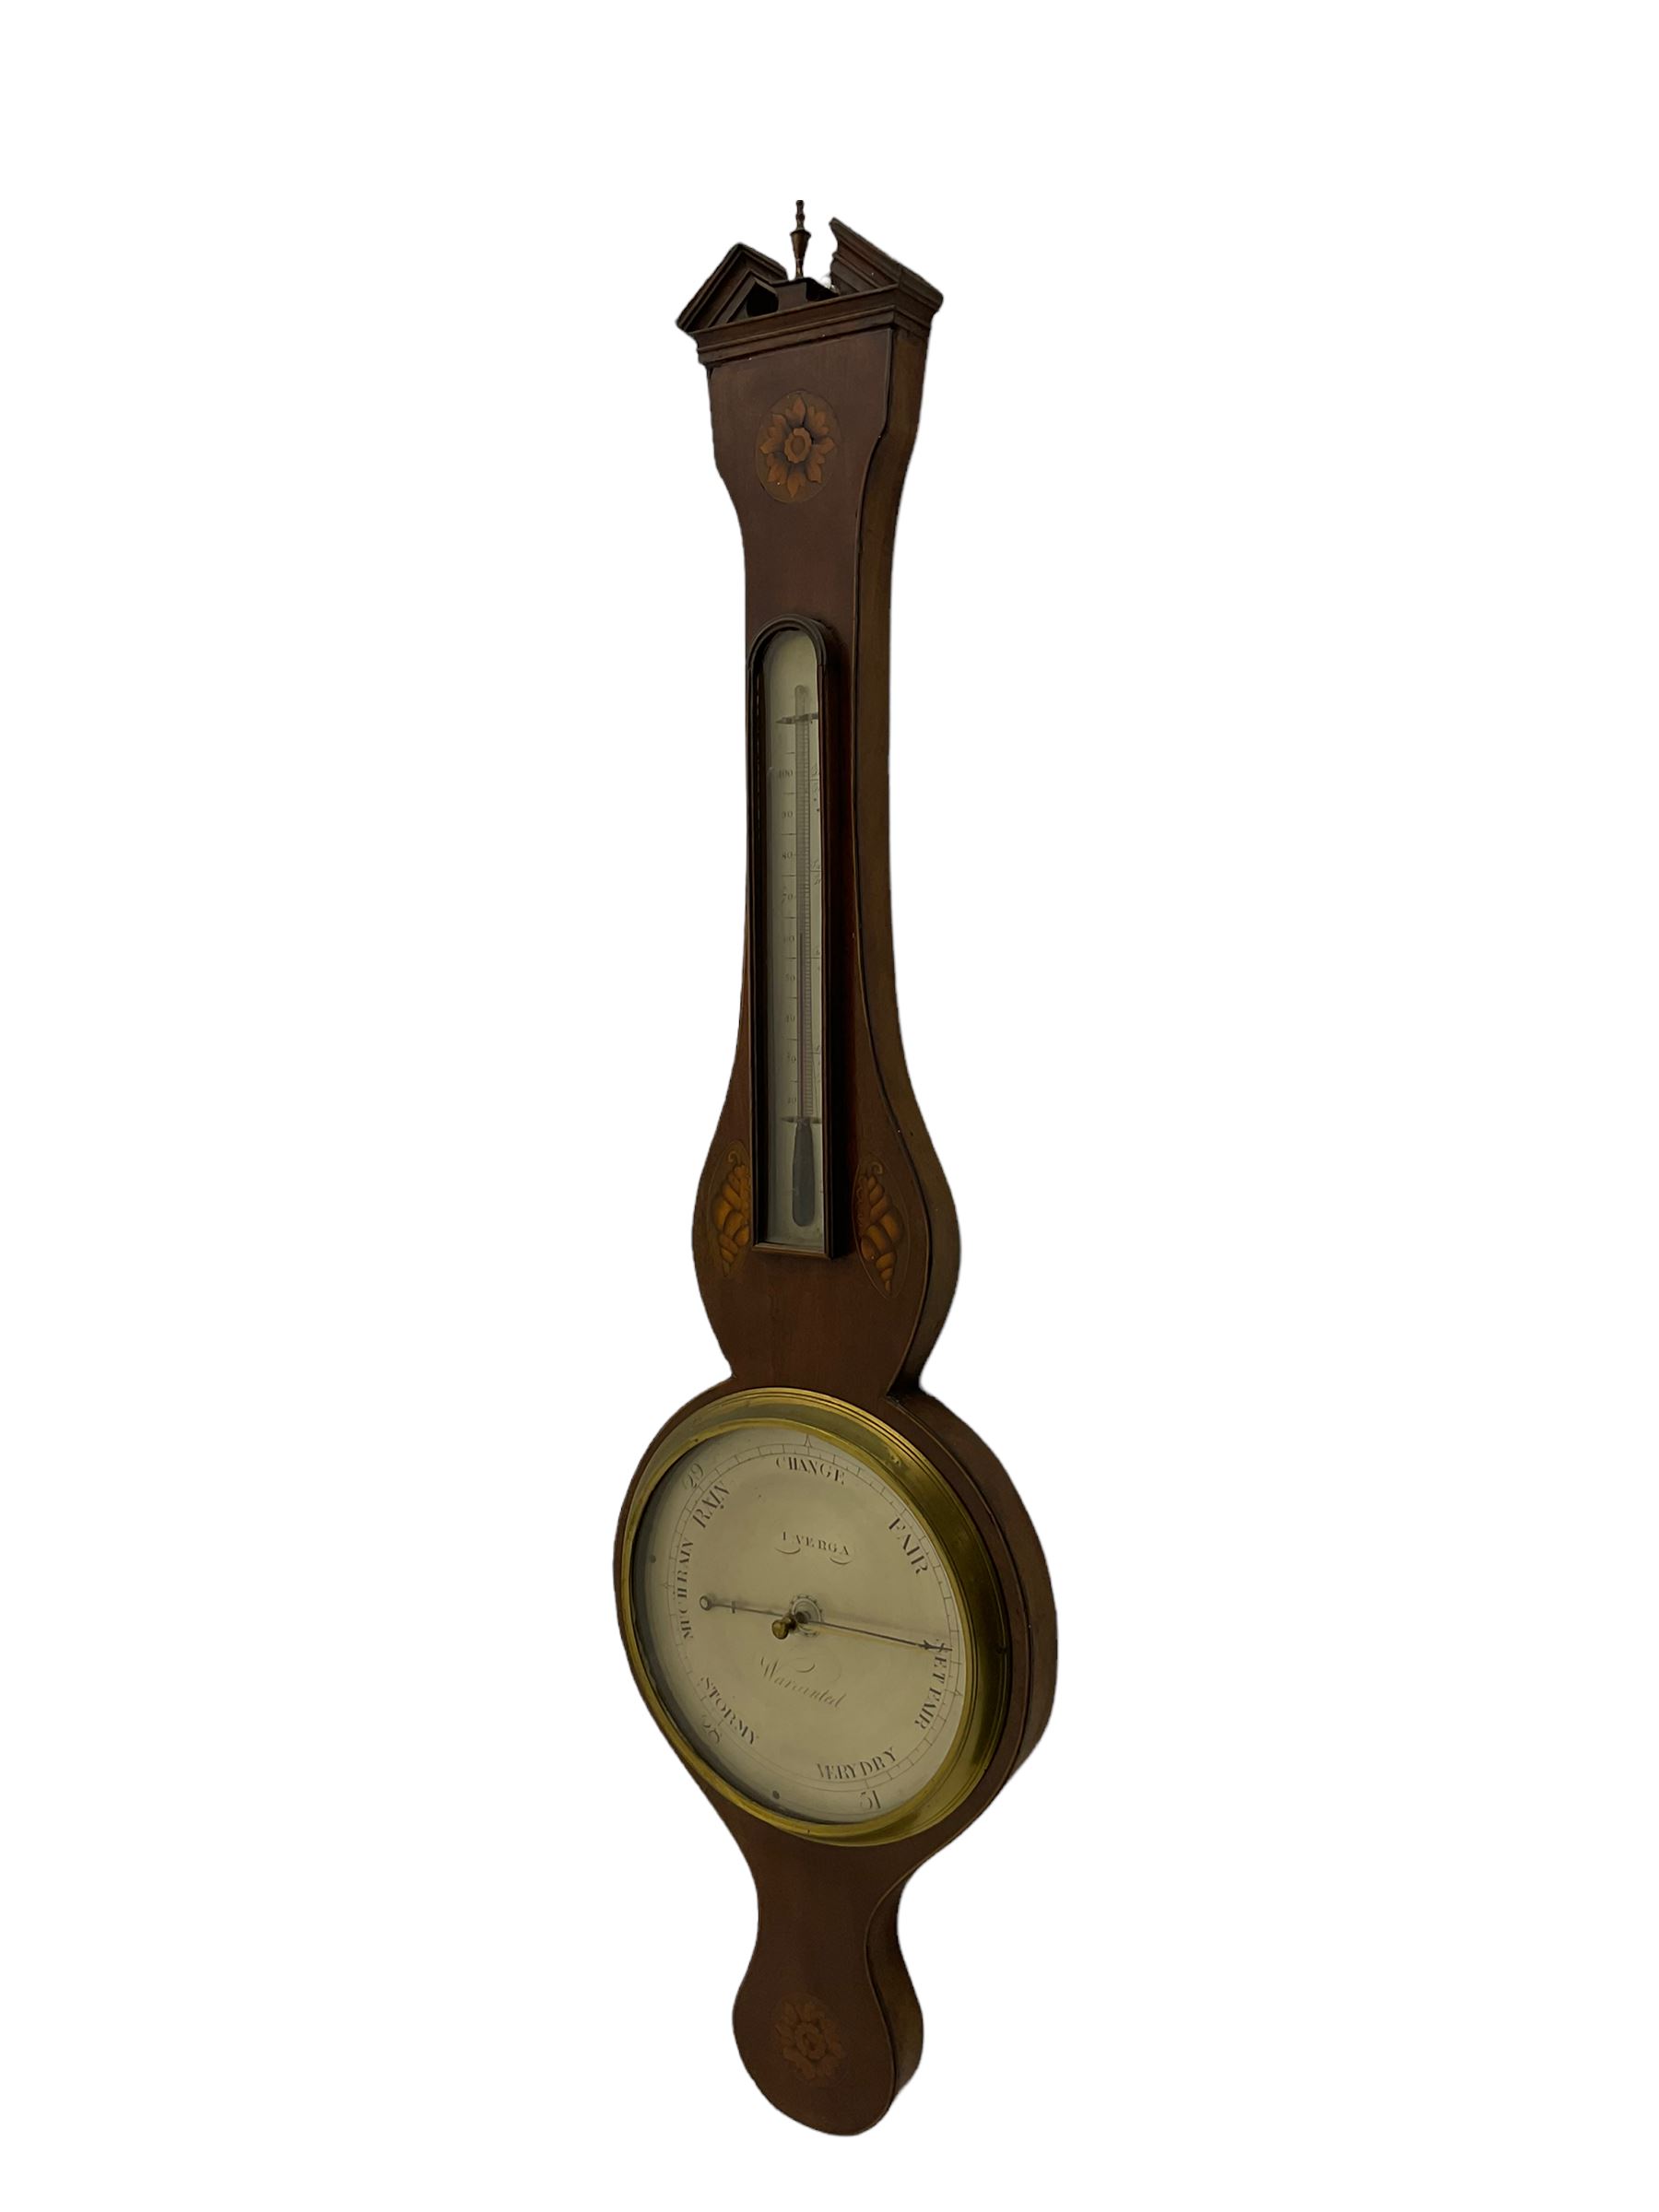 A William IV mercury wheel barometer c1830 with an inlaid broken pediment - Image 2 of 4